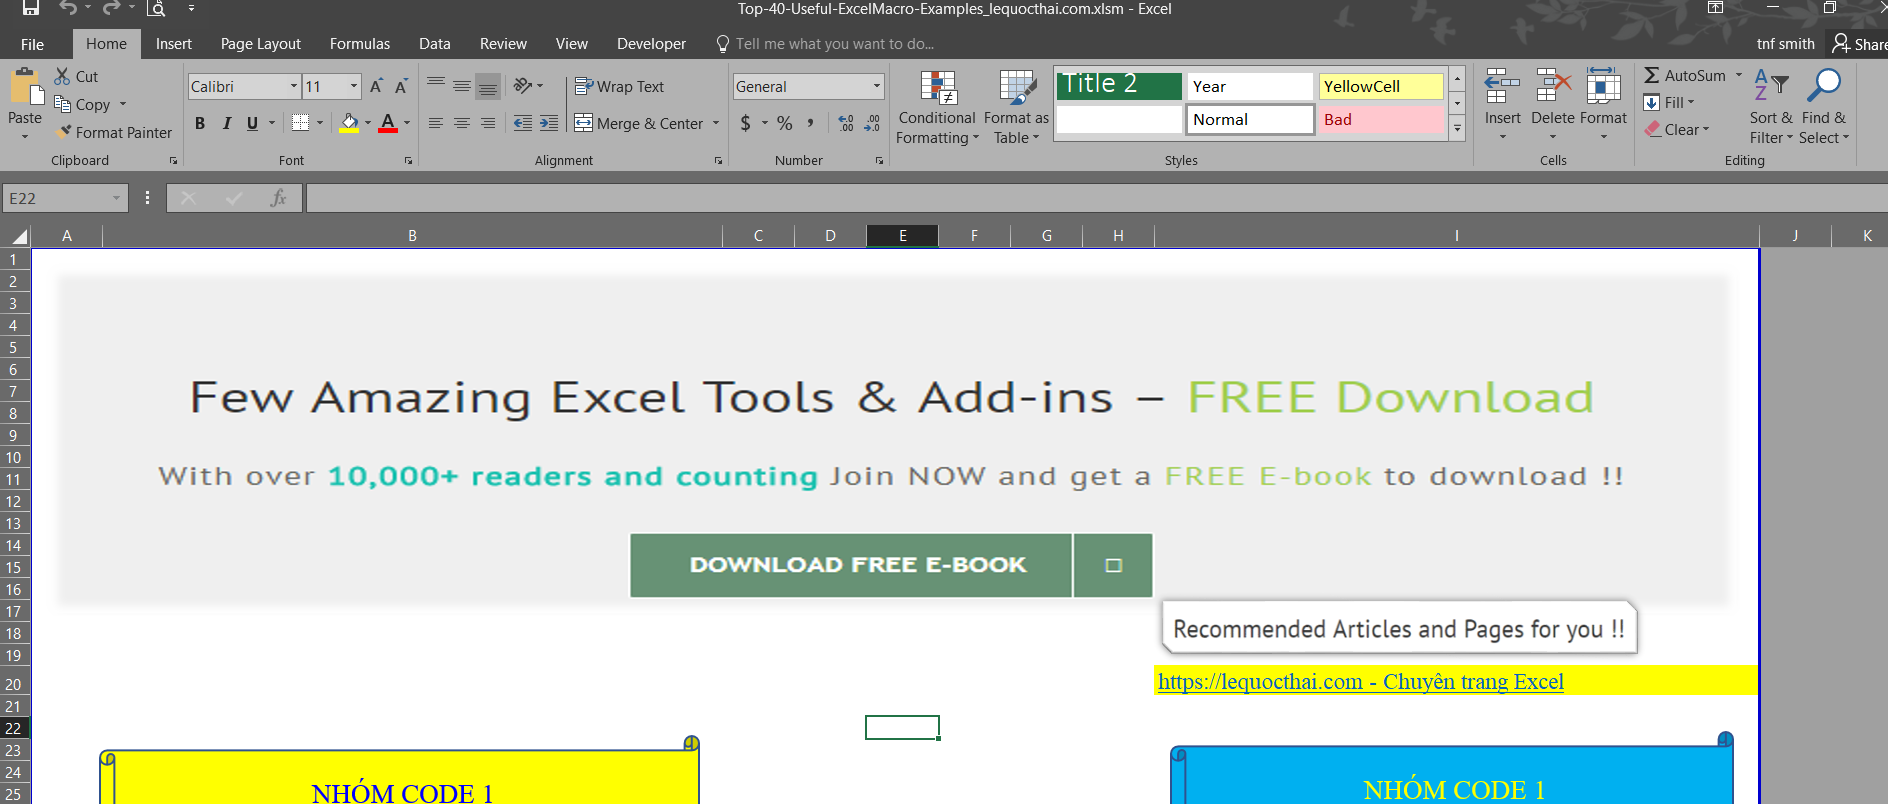 40 useful excel templates